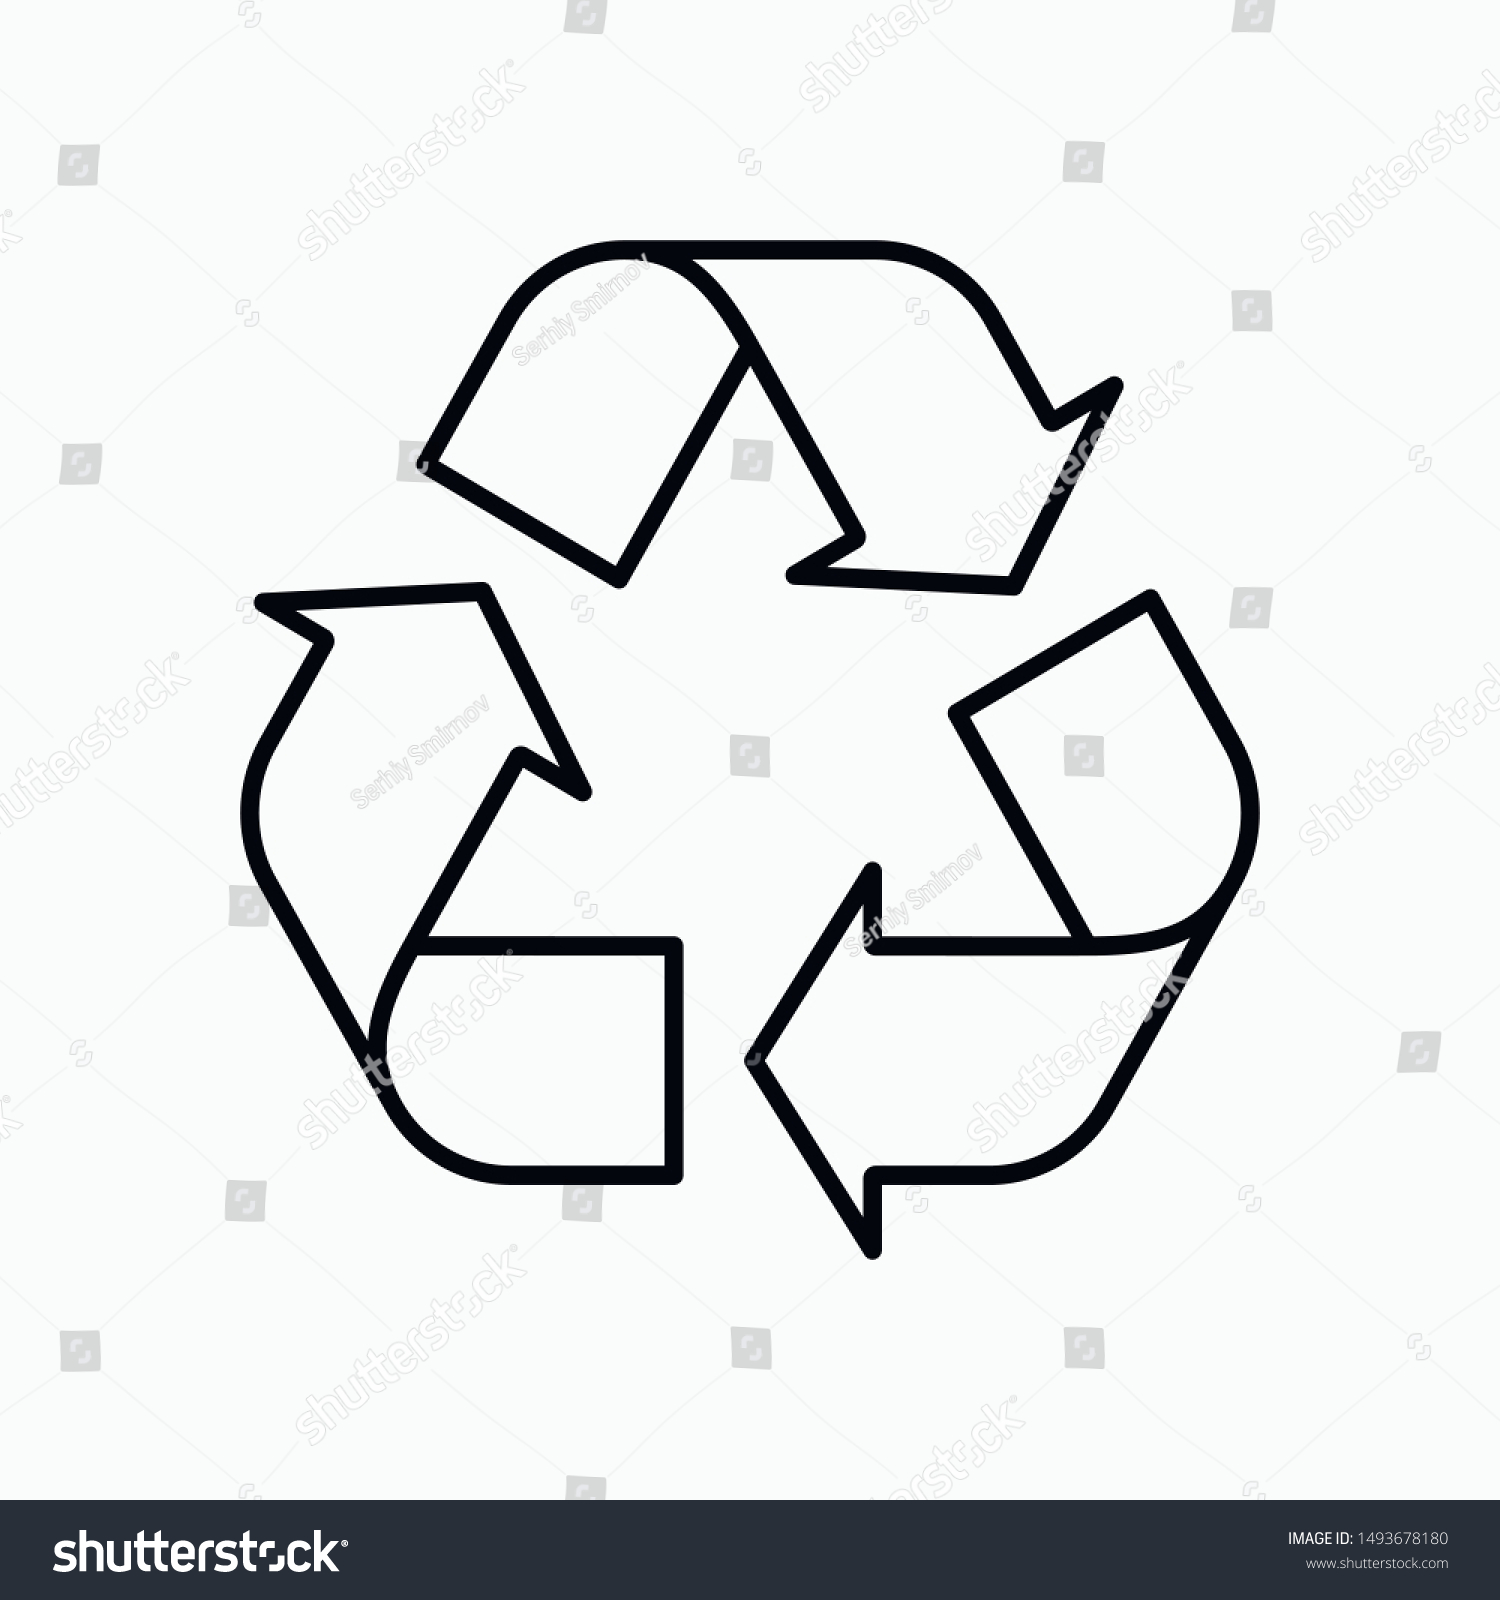 Recycling icon vector technology symbol #1493678180